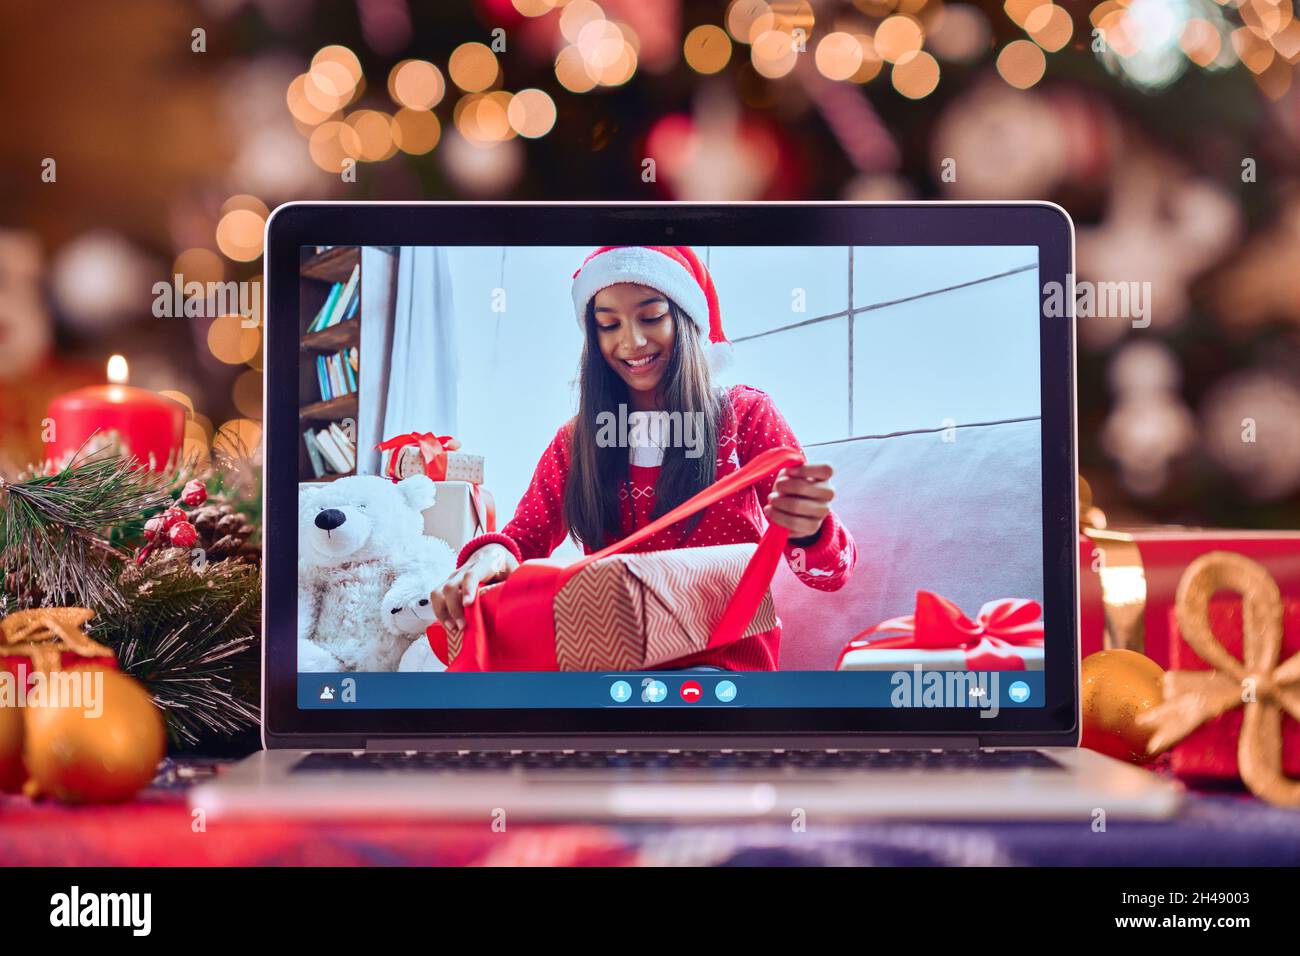 Teen girl opens gift on video call laptop screen on Christmas table background. Stock Photo